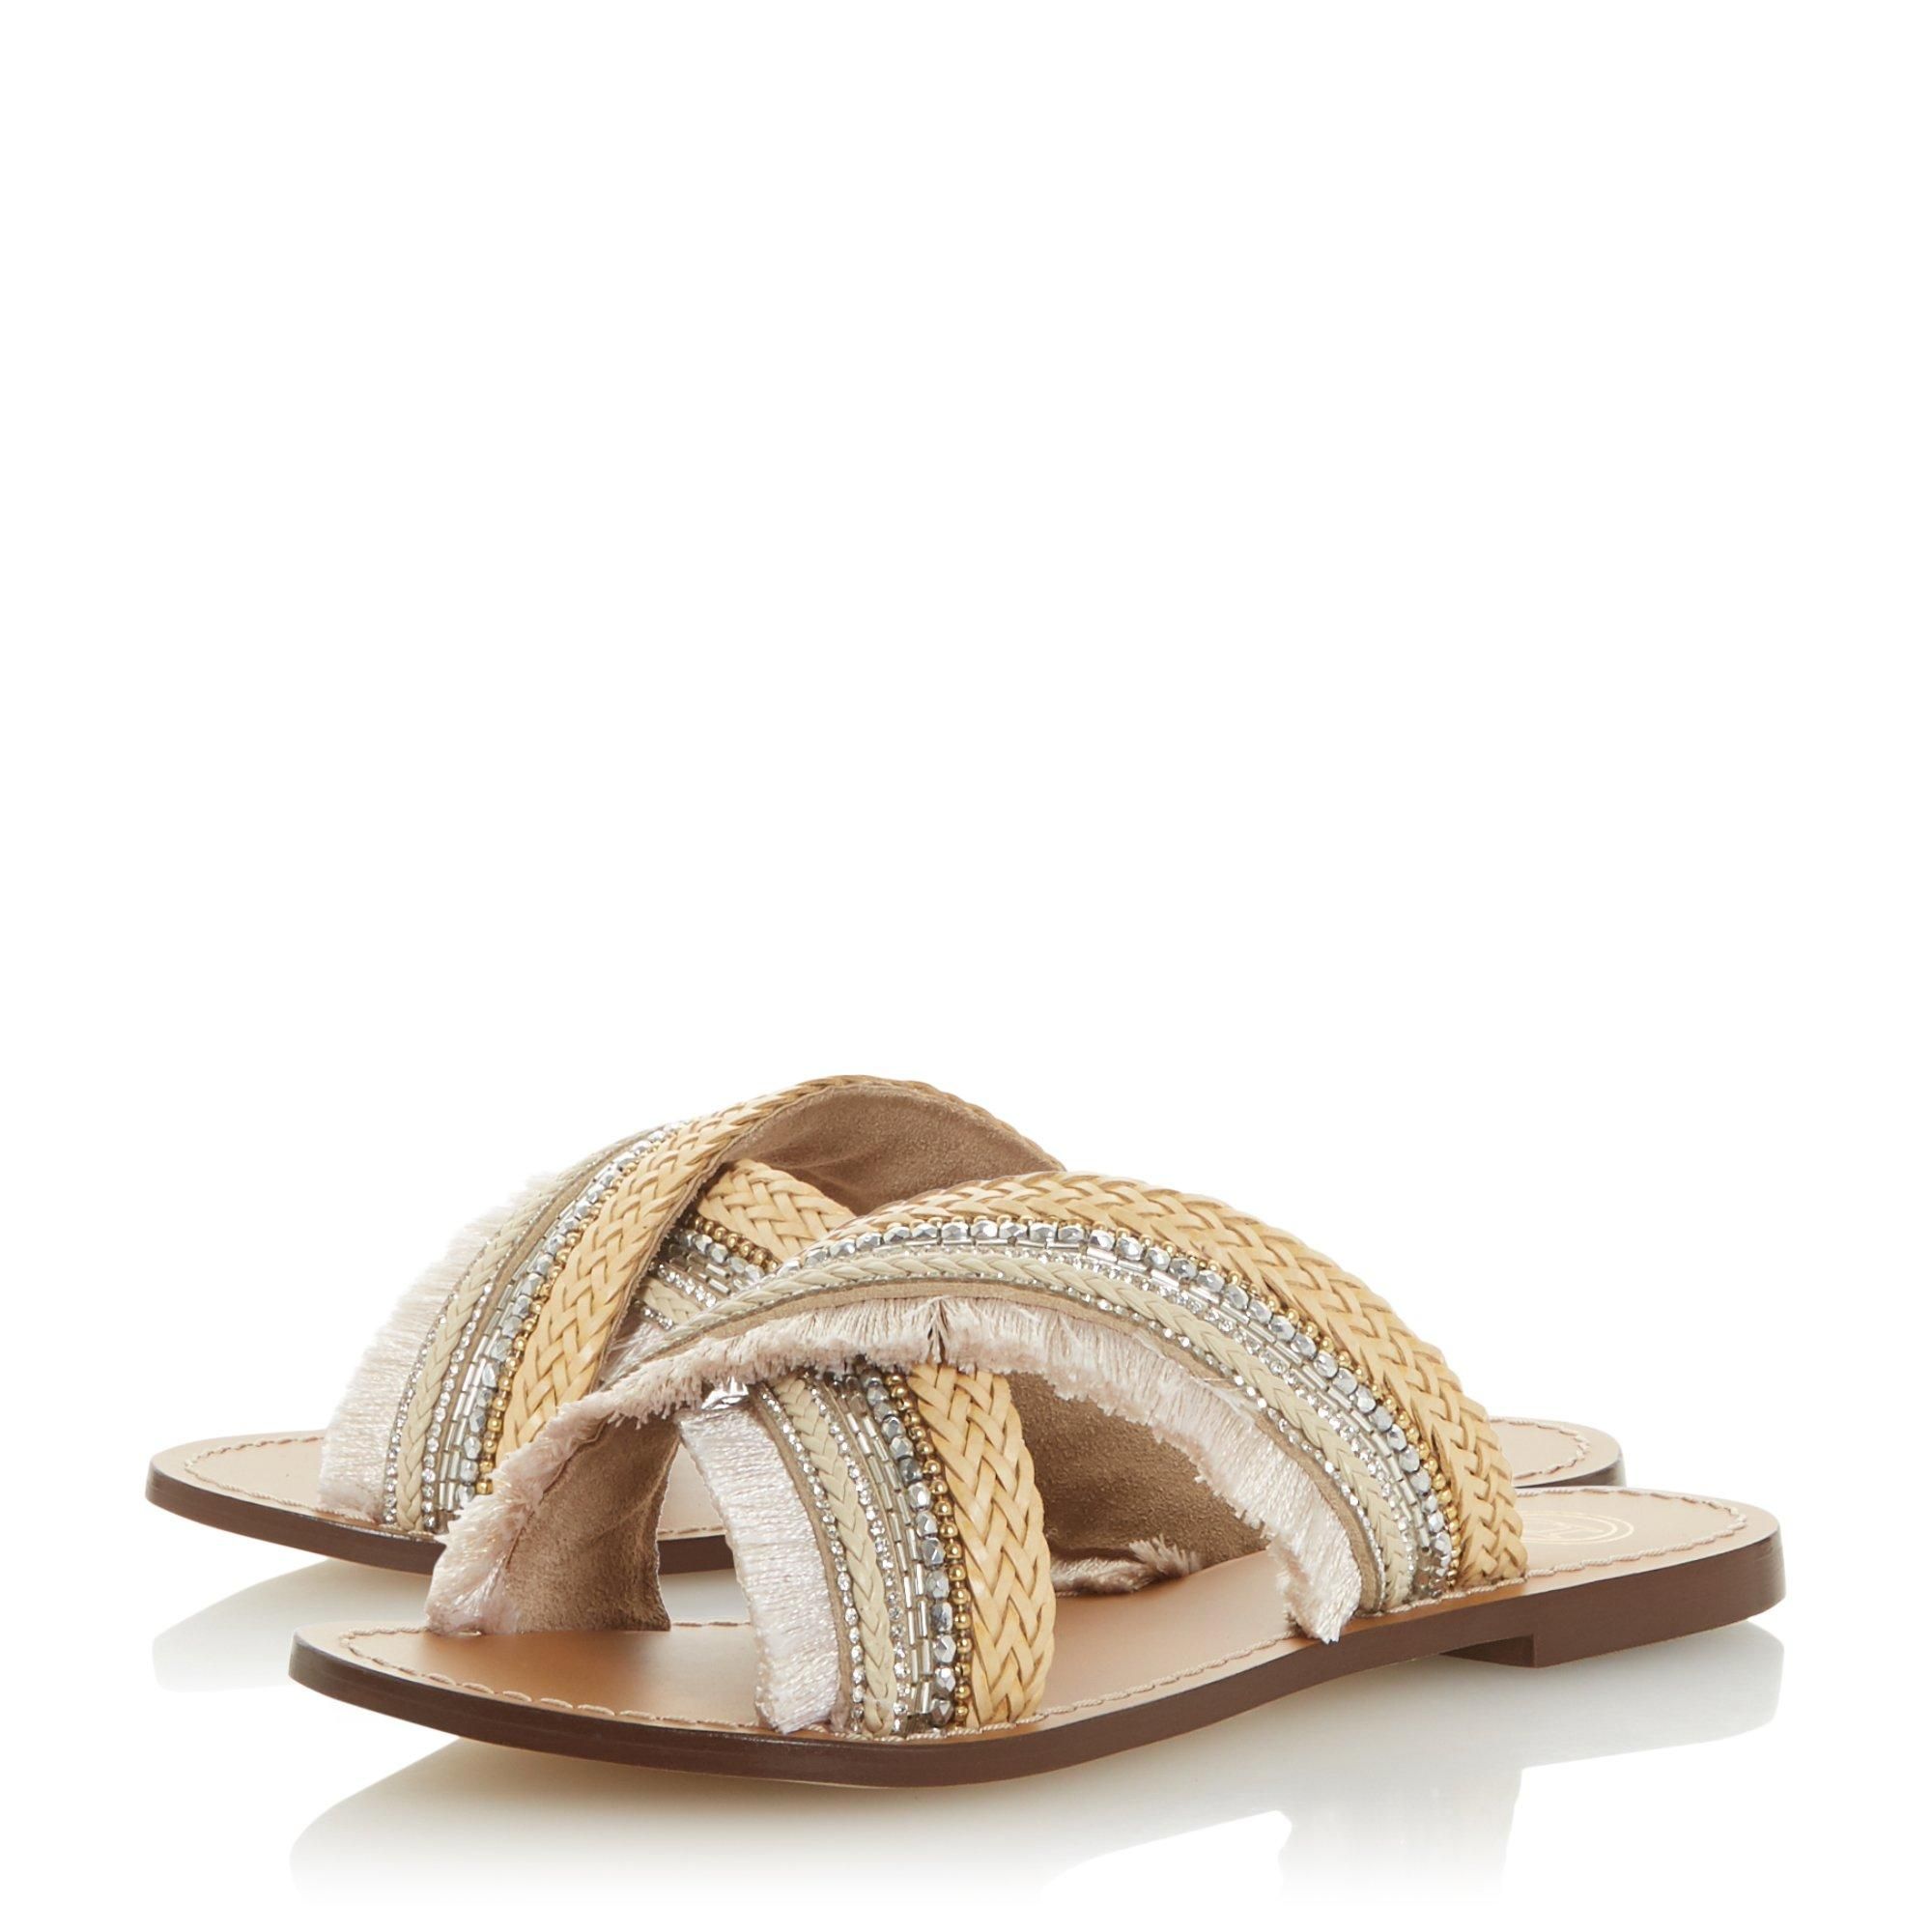 Upgrade your casual footwear with this sandal from Dune London. Showcasing an embellished fringed detail at the upper. The crossover straps and flat sole complete the design.